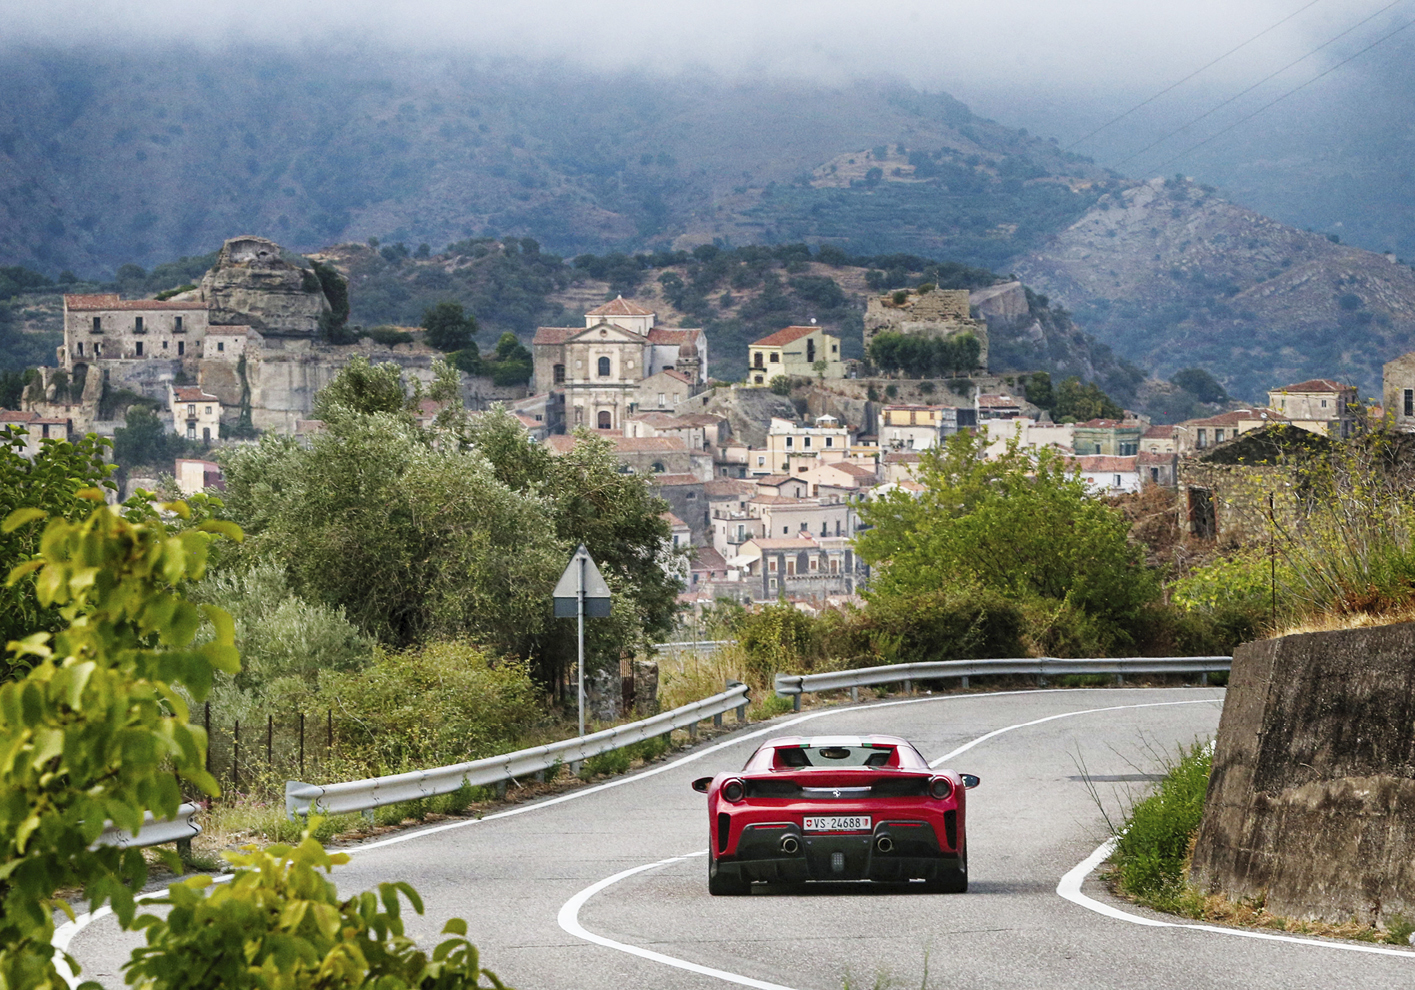 Exploring the island’s mountain views during the Cavalcade in Sicily